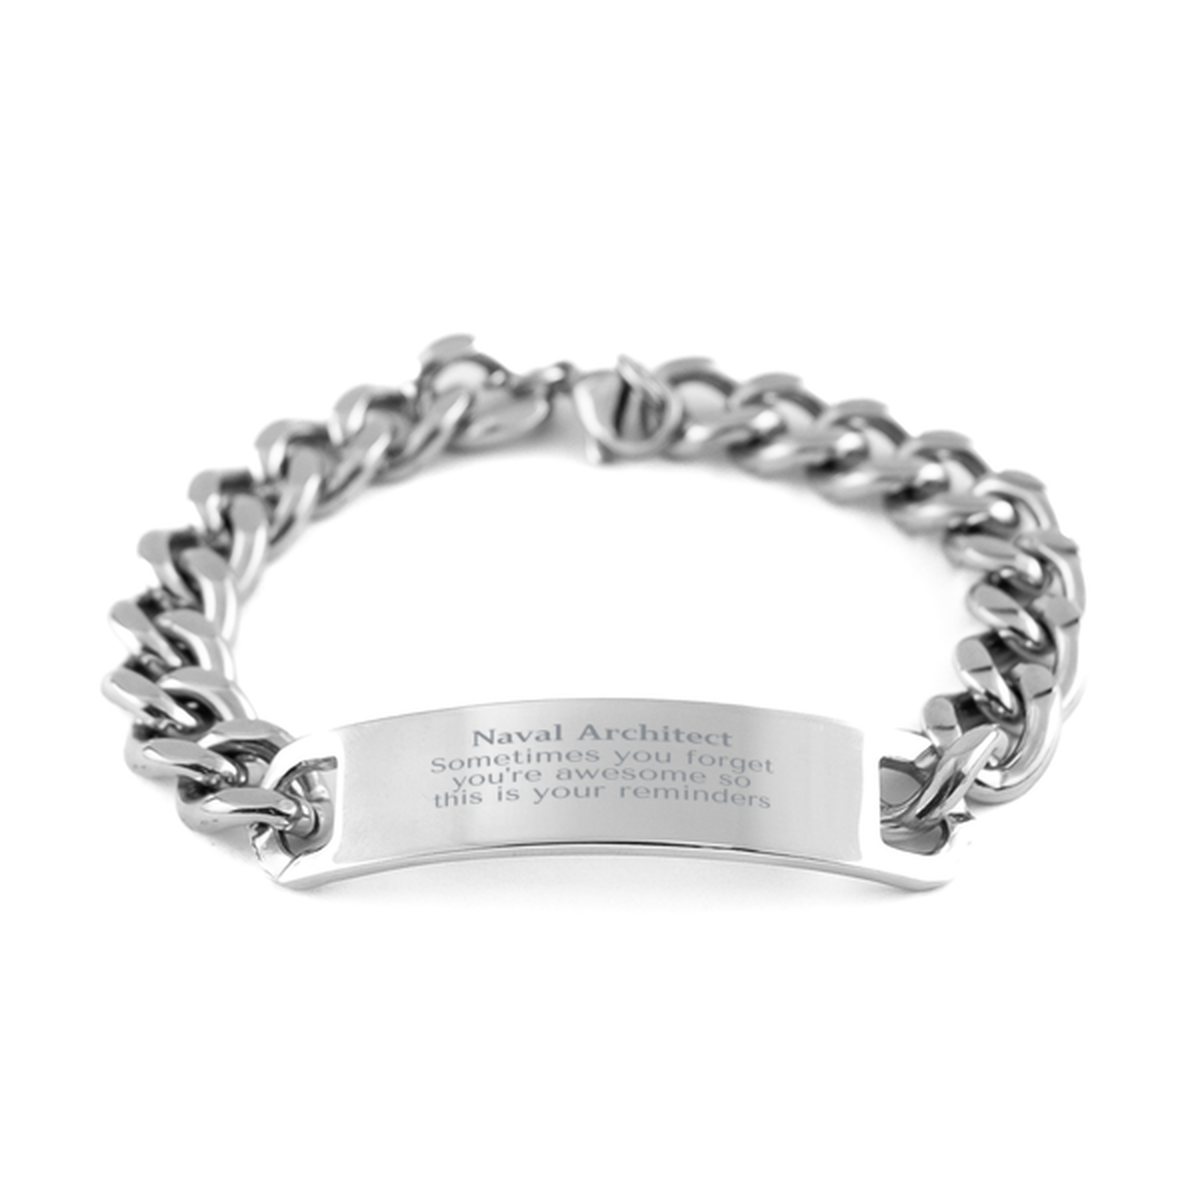 Sentimental Naval Architect Cuban Chain Stainless Steel Bracelet, Naval Architect Sometimes you forget you're awesome so this is your reminders, Graduation Christmas Birthday Gifts for Naval Architect, Men, Women, Coworkers